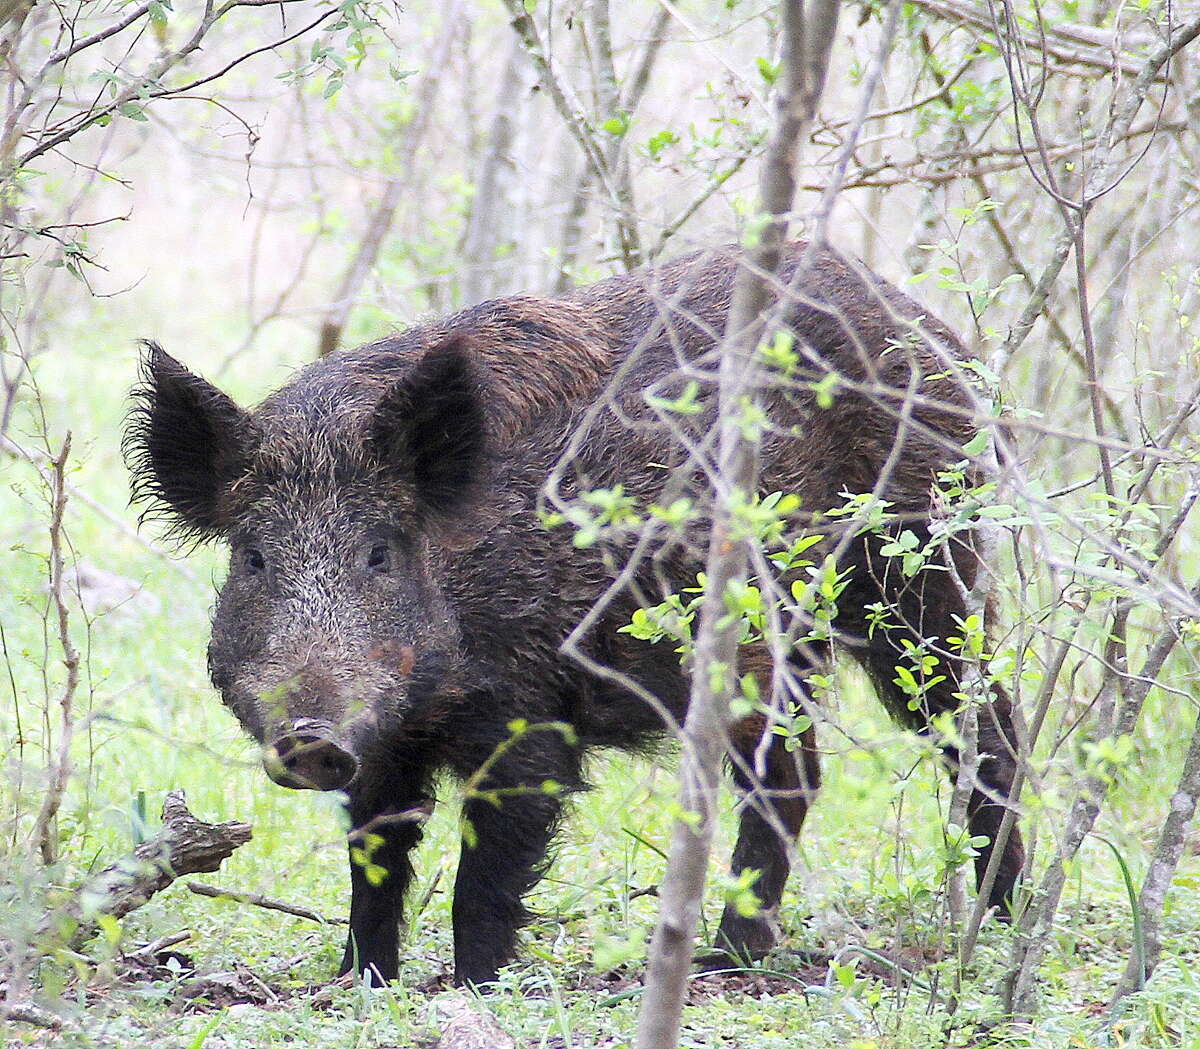 Feral hogs may live in suburban areas without humans knowing they are around. They can make their presence known by destroying lawns and gardens.